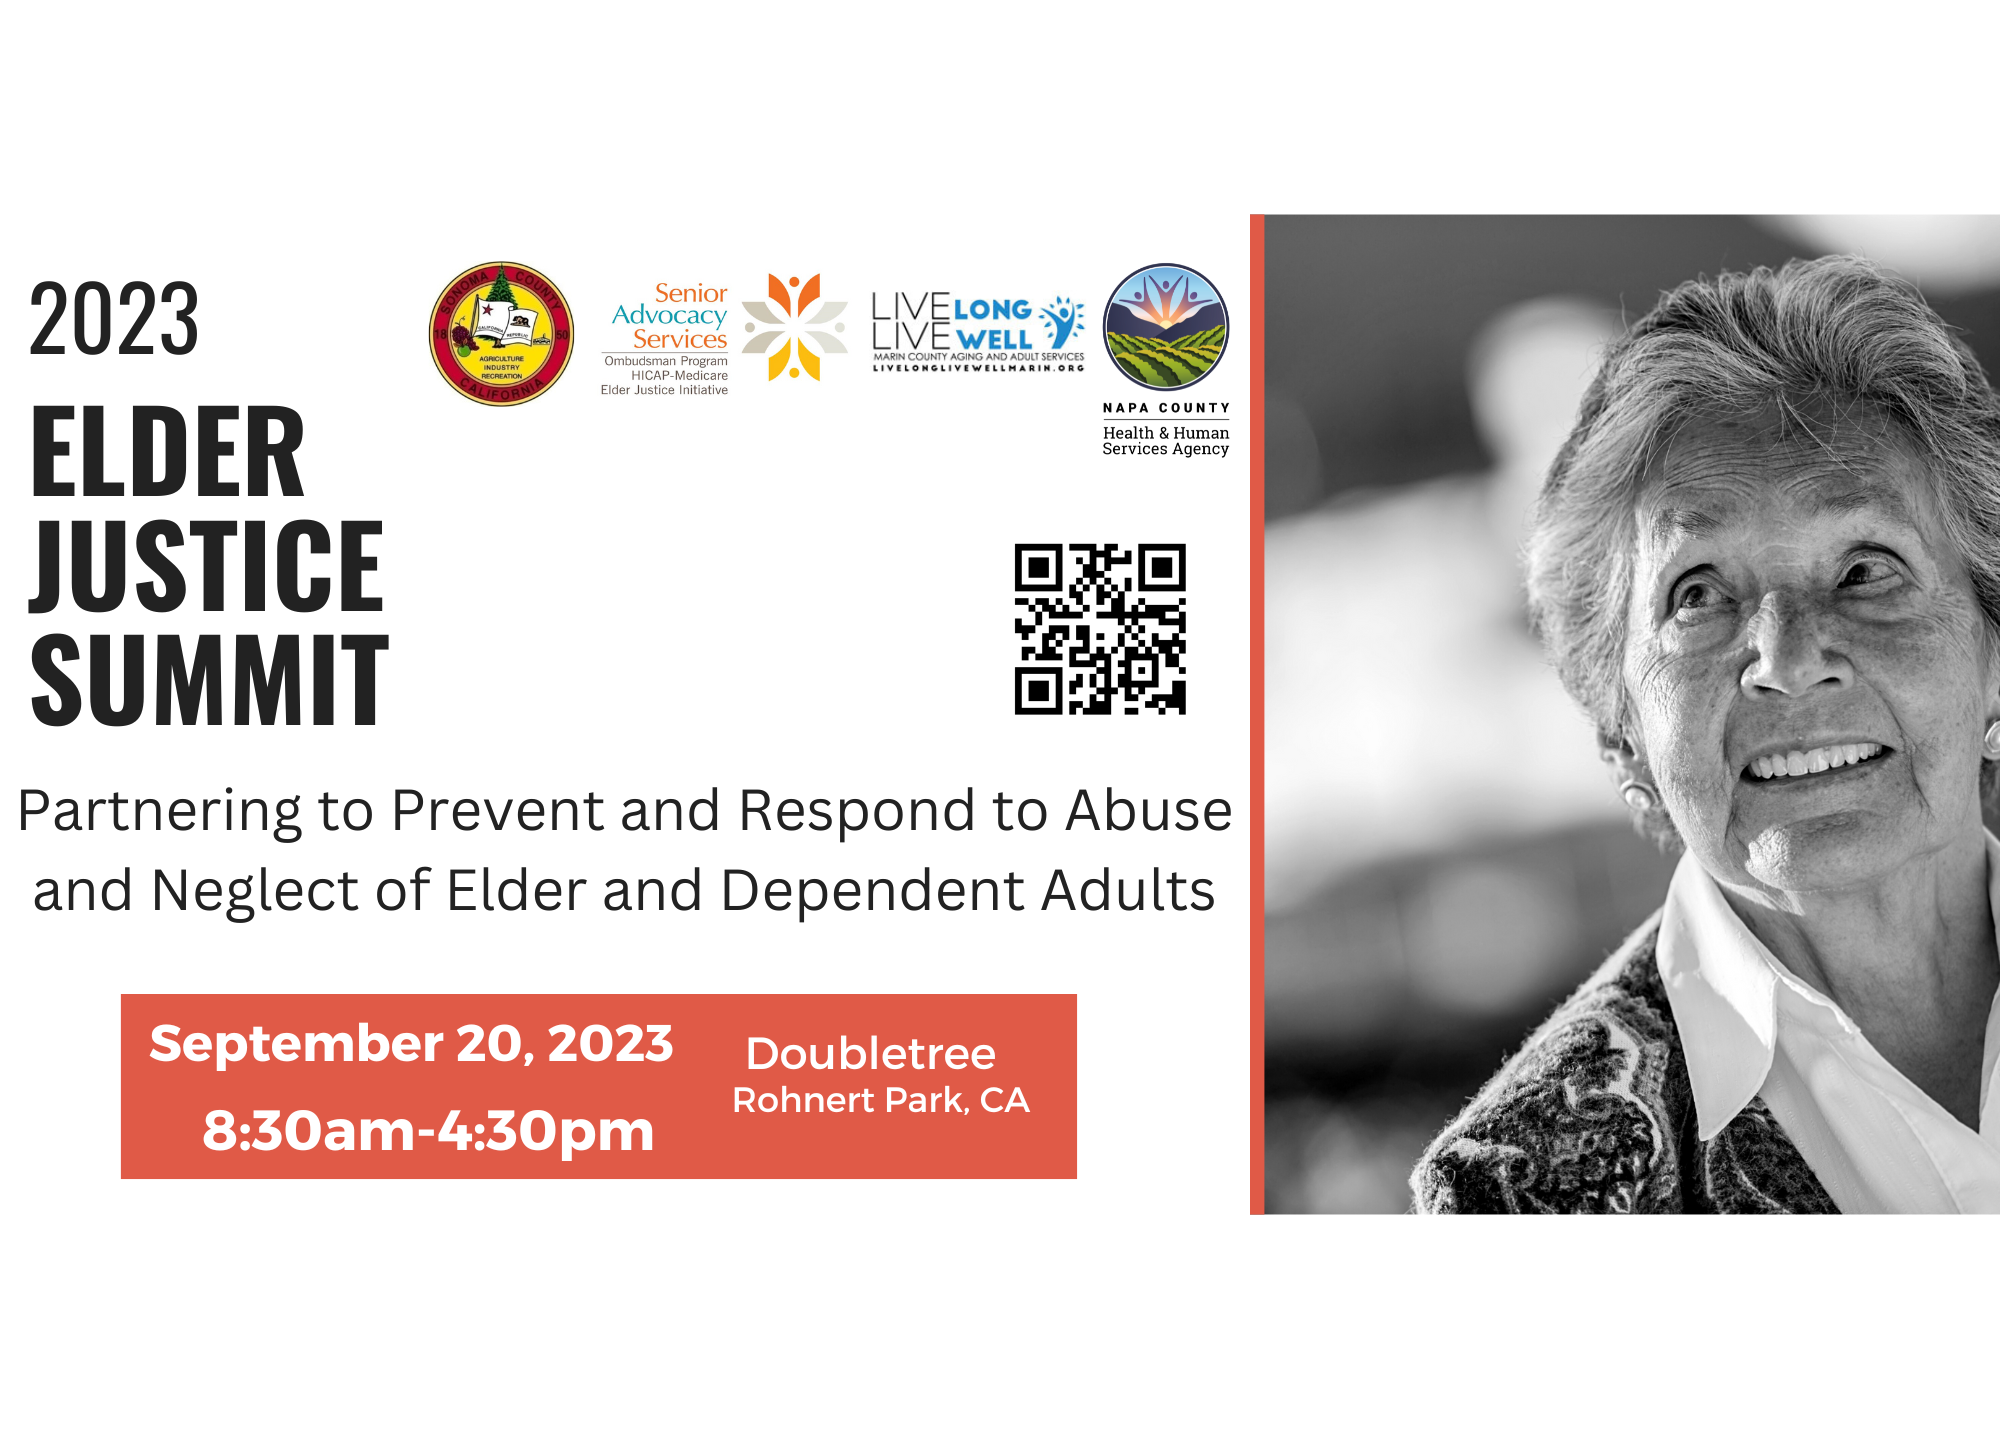 2023 Elder Justice Summit Banner with logos, QR code and a mission statement that reads "Partnering to Prevent and Respond to Abuse and Neglect of Elder Dependent Adults".